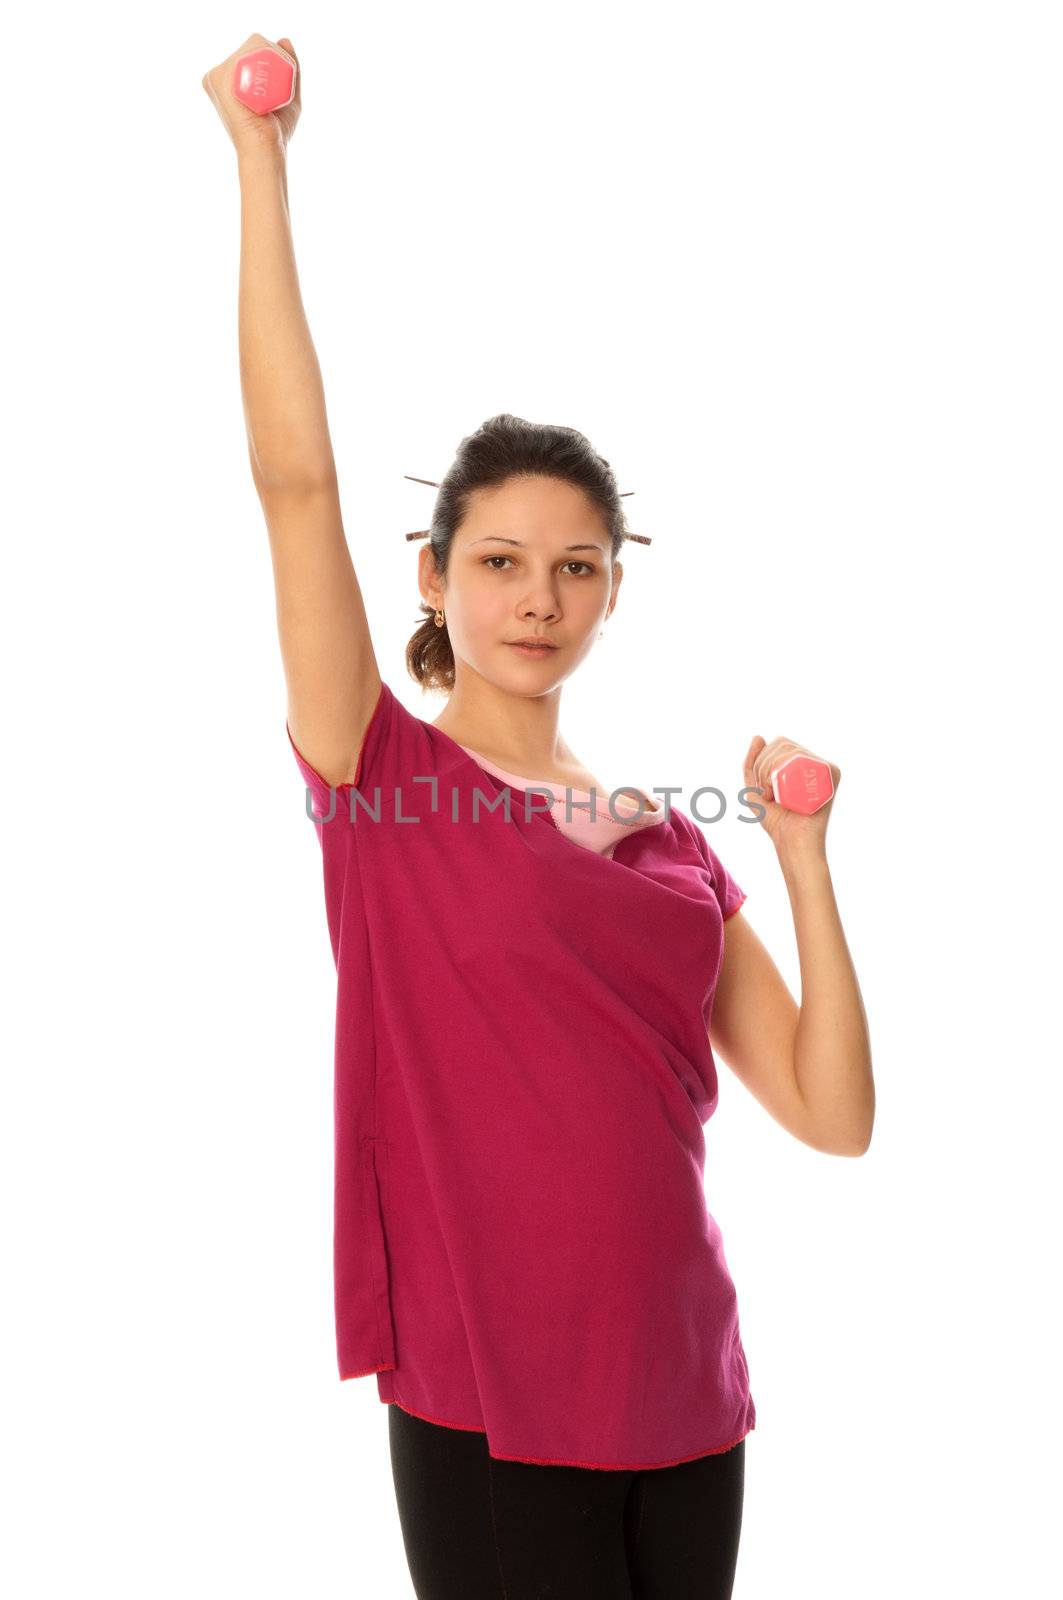 instructor showing to people exercises using dumbbells at gym